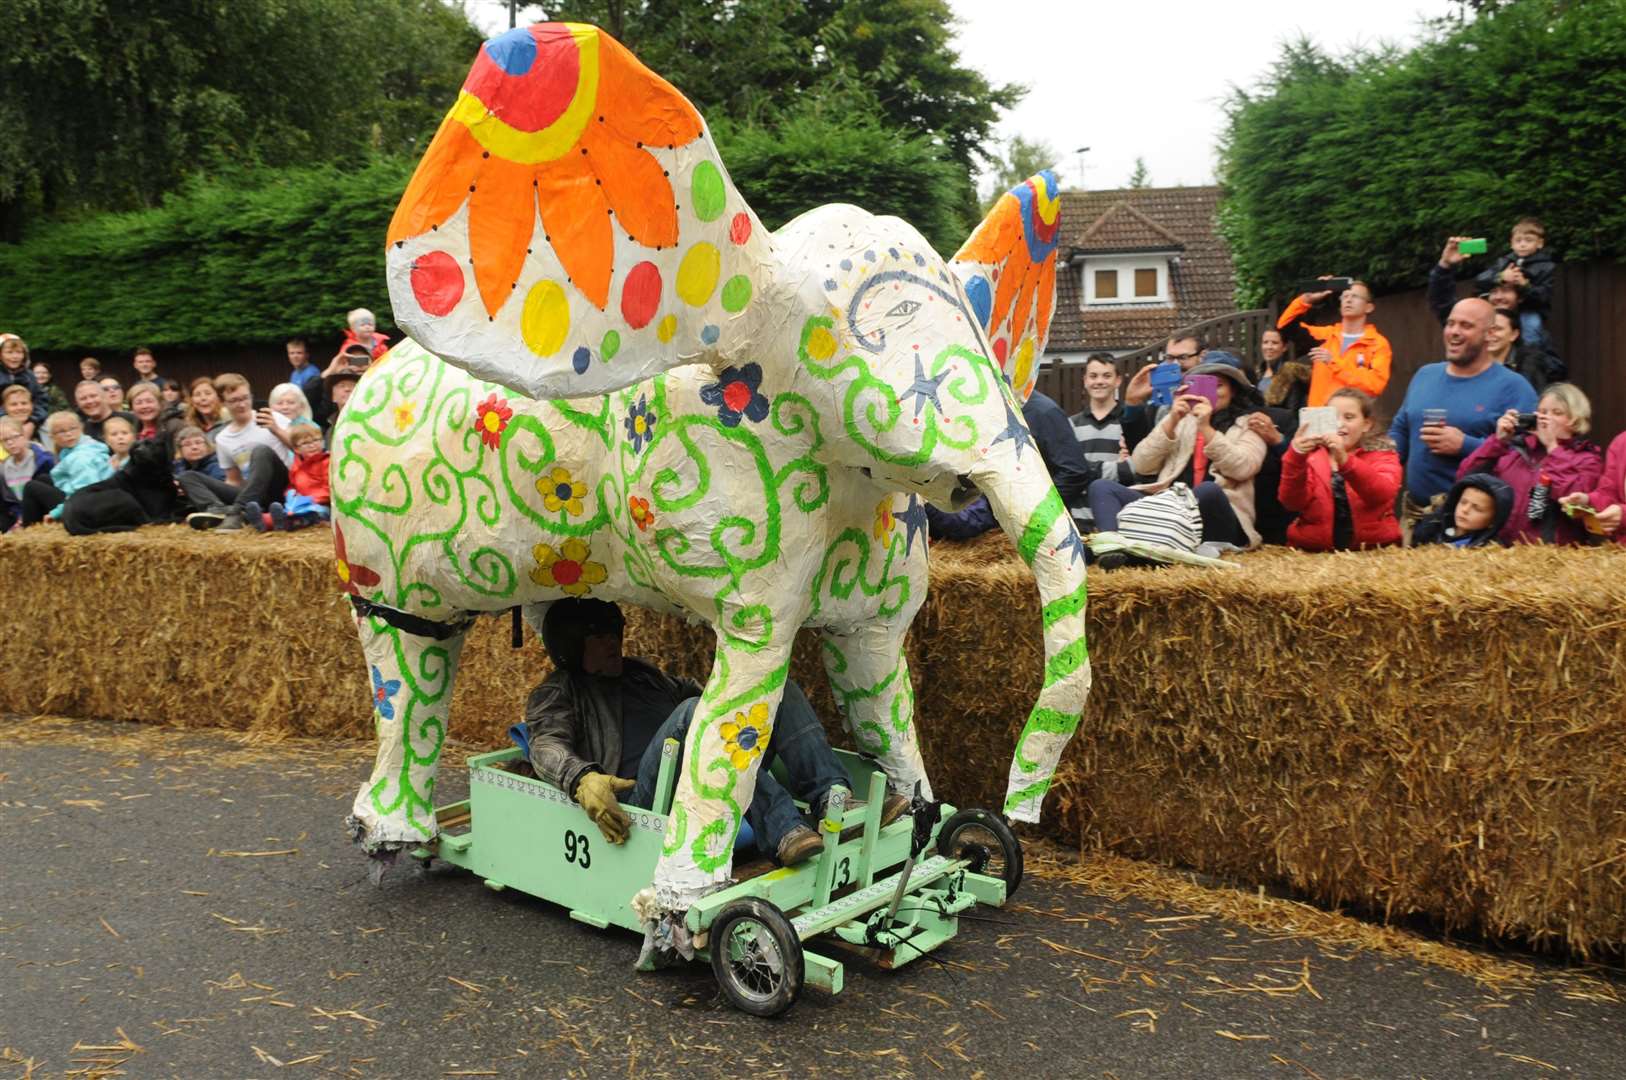 A life-sized elephant cart graced the tracks in 2015. Picture: Wayne McCabe